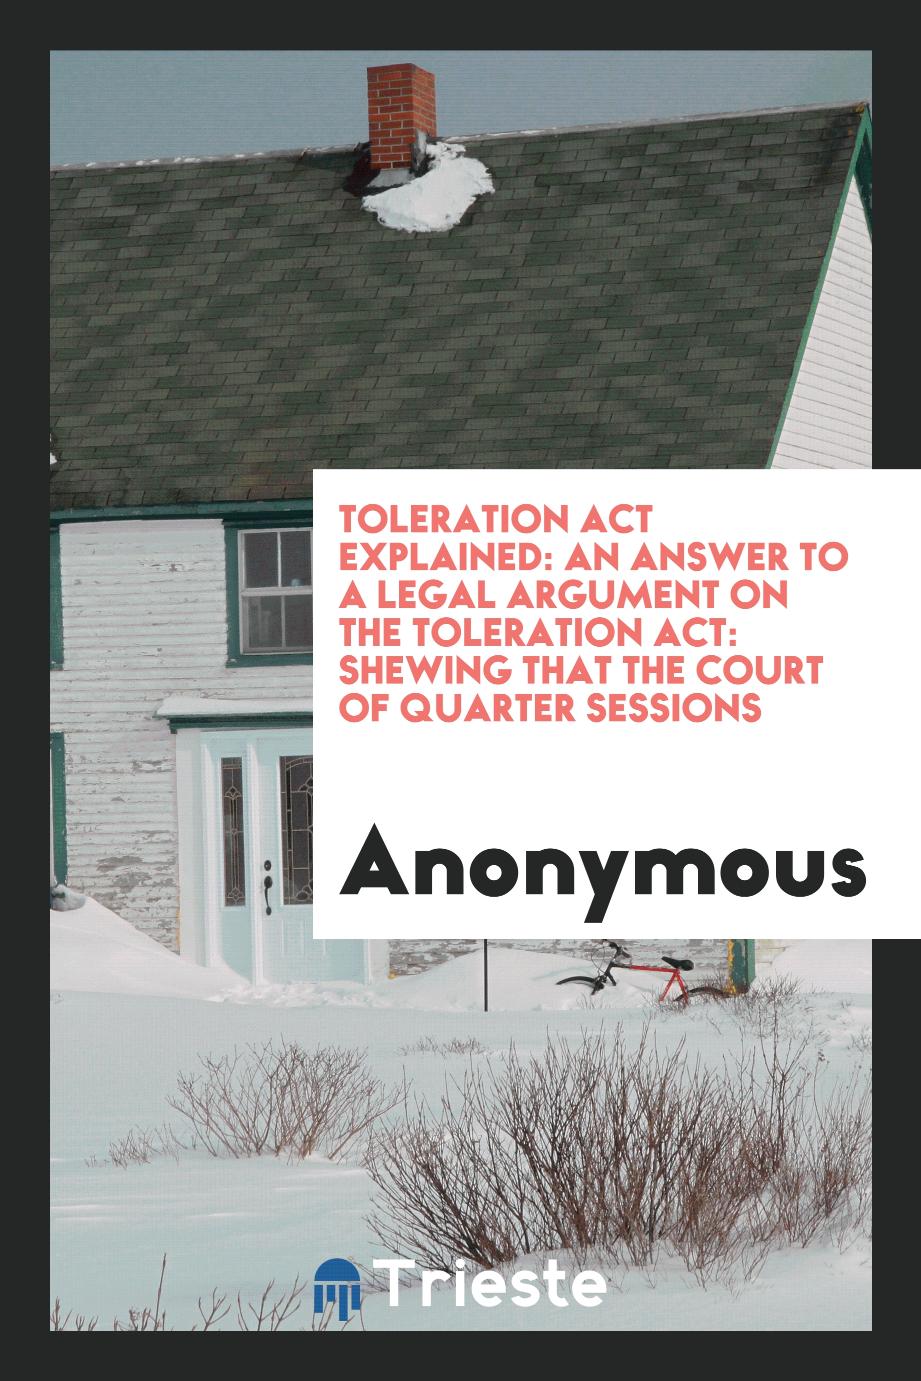 Toleration Act Explained: An Answer to a Legal Argument on the Toleration Act: Shewing that the court of quarter sessions